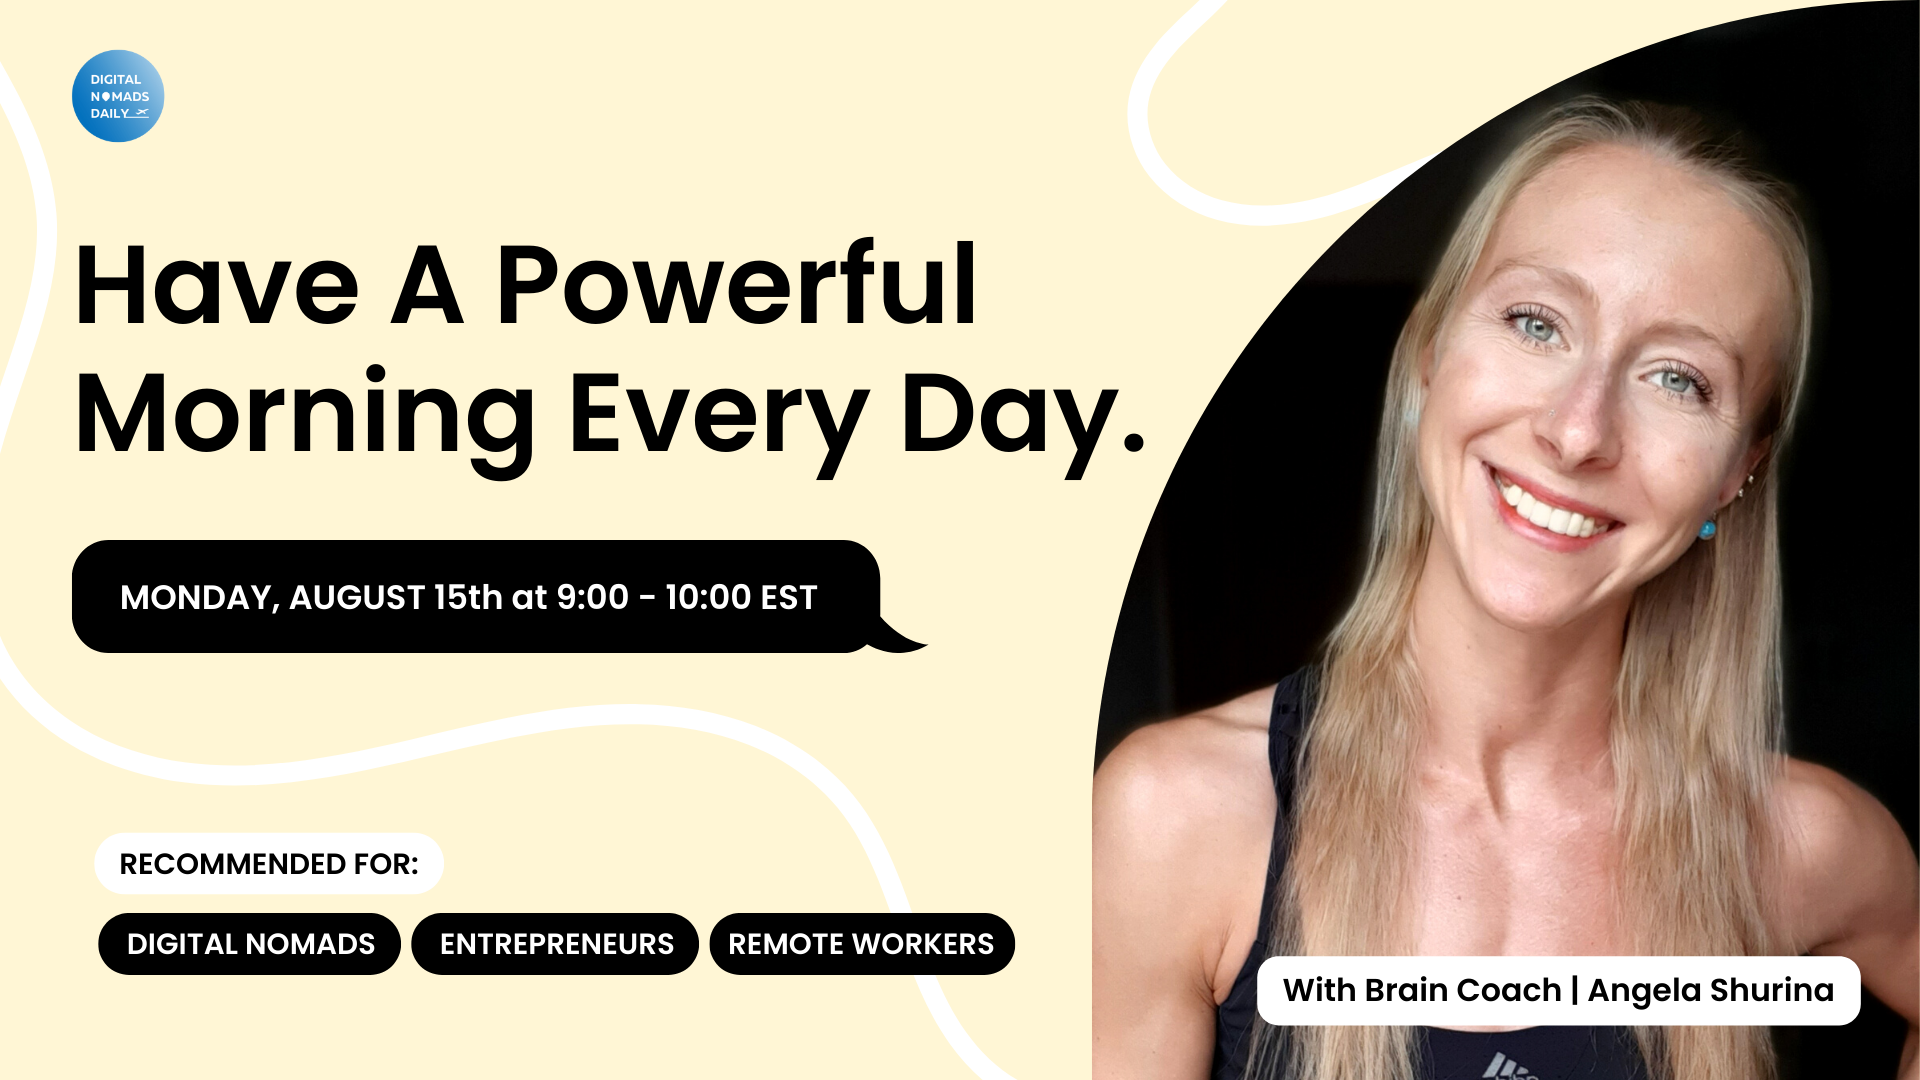 Live Workshop About Optimizing Your Brain to increase performance for digital nomads and entrepreneurs with Angela Shurina